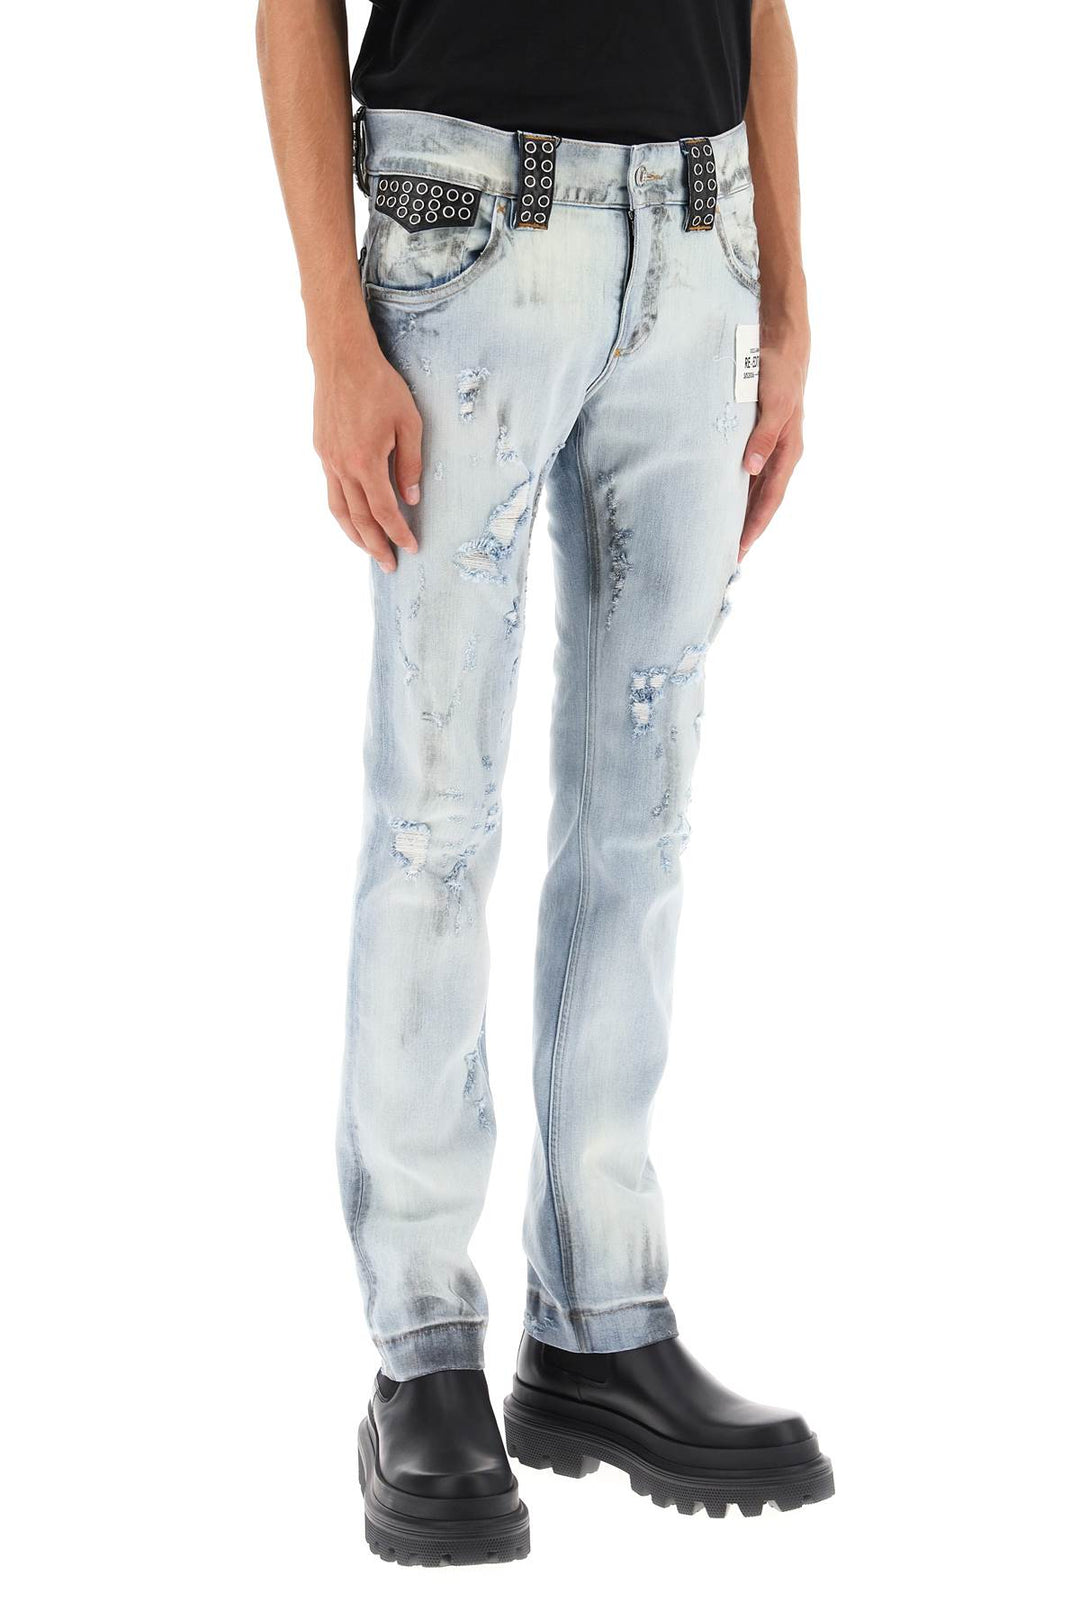 Dolce & Gabbana Re Edition Jeans With Leather Detailing   Celeste